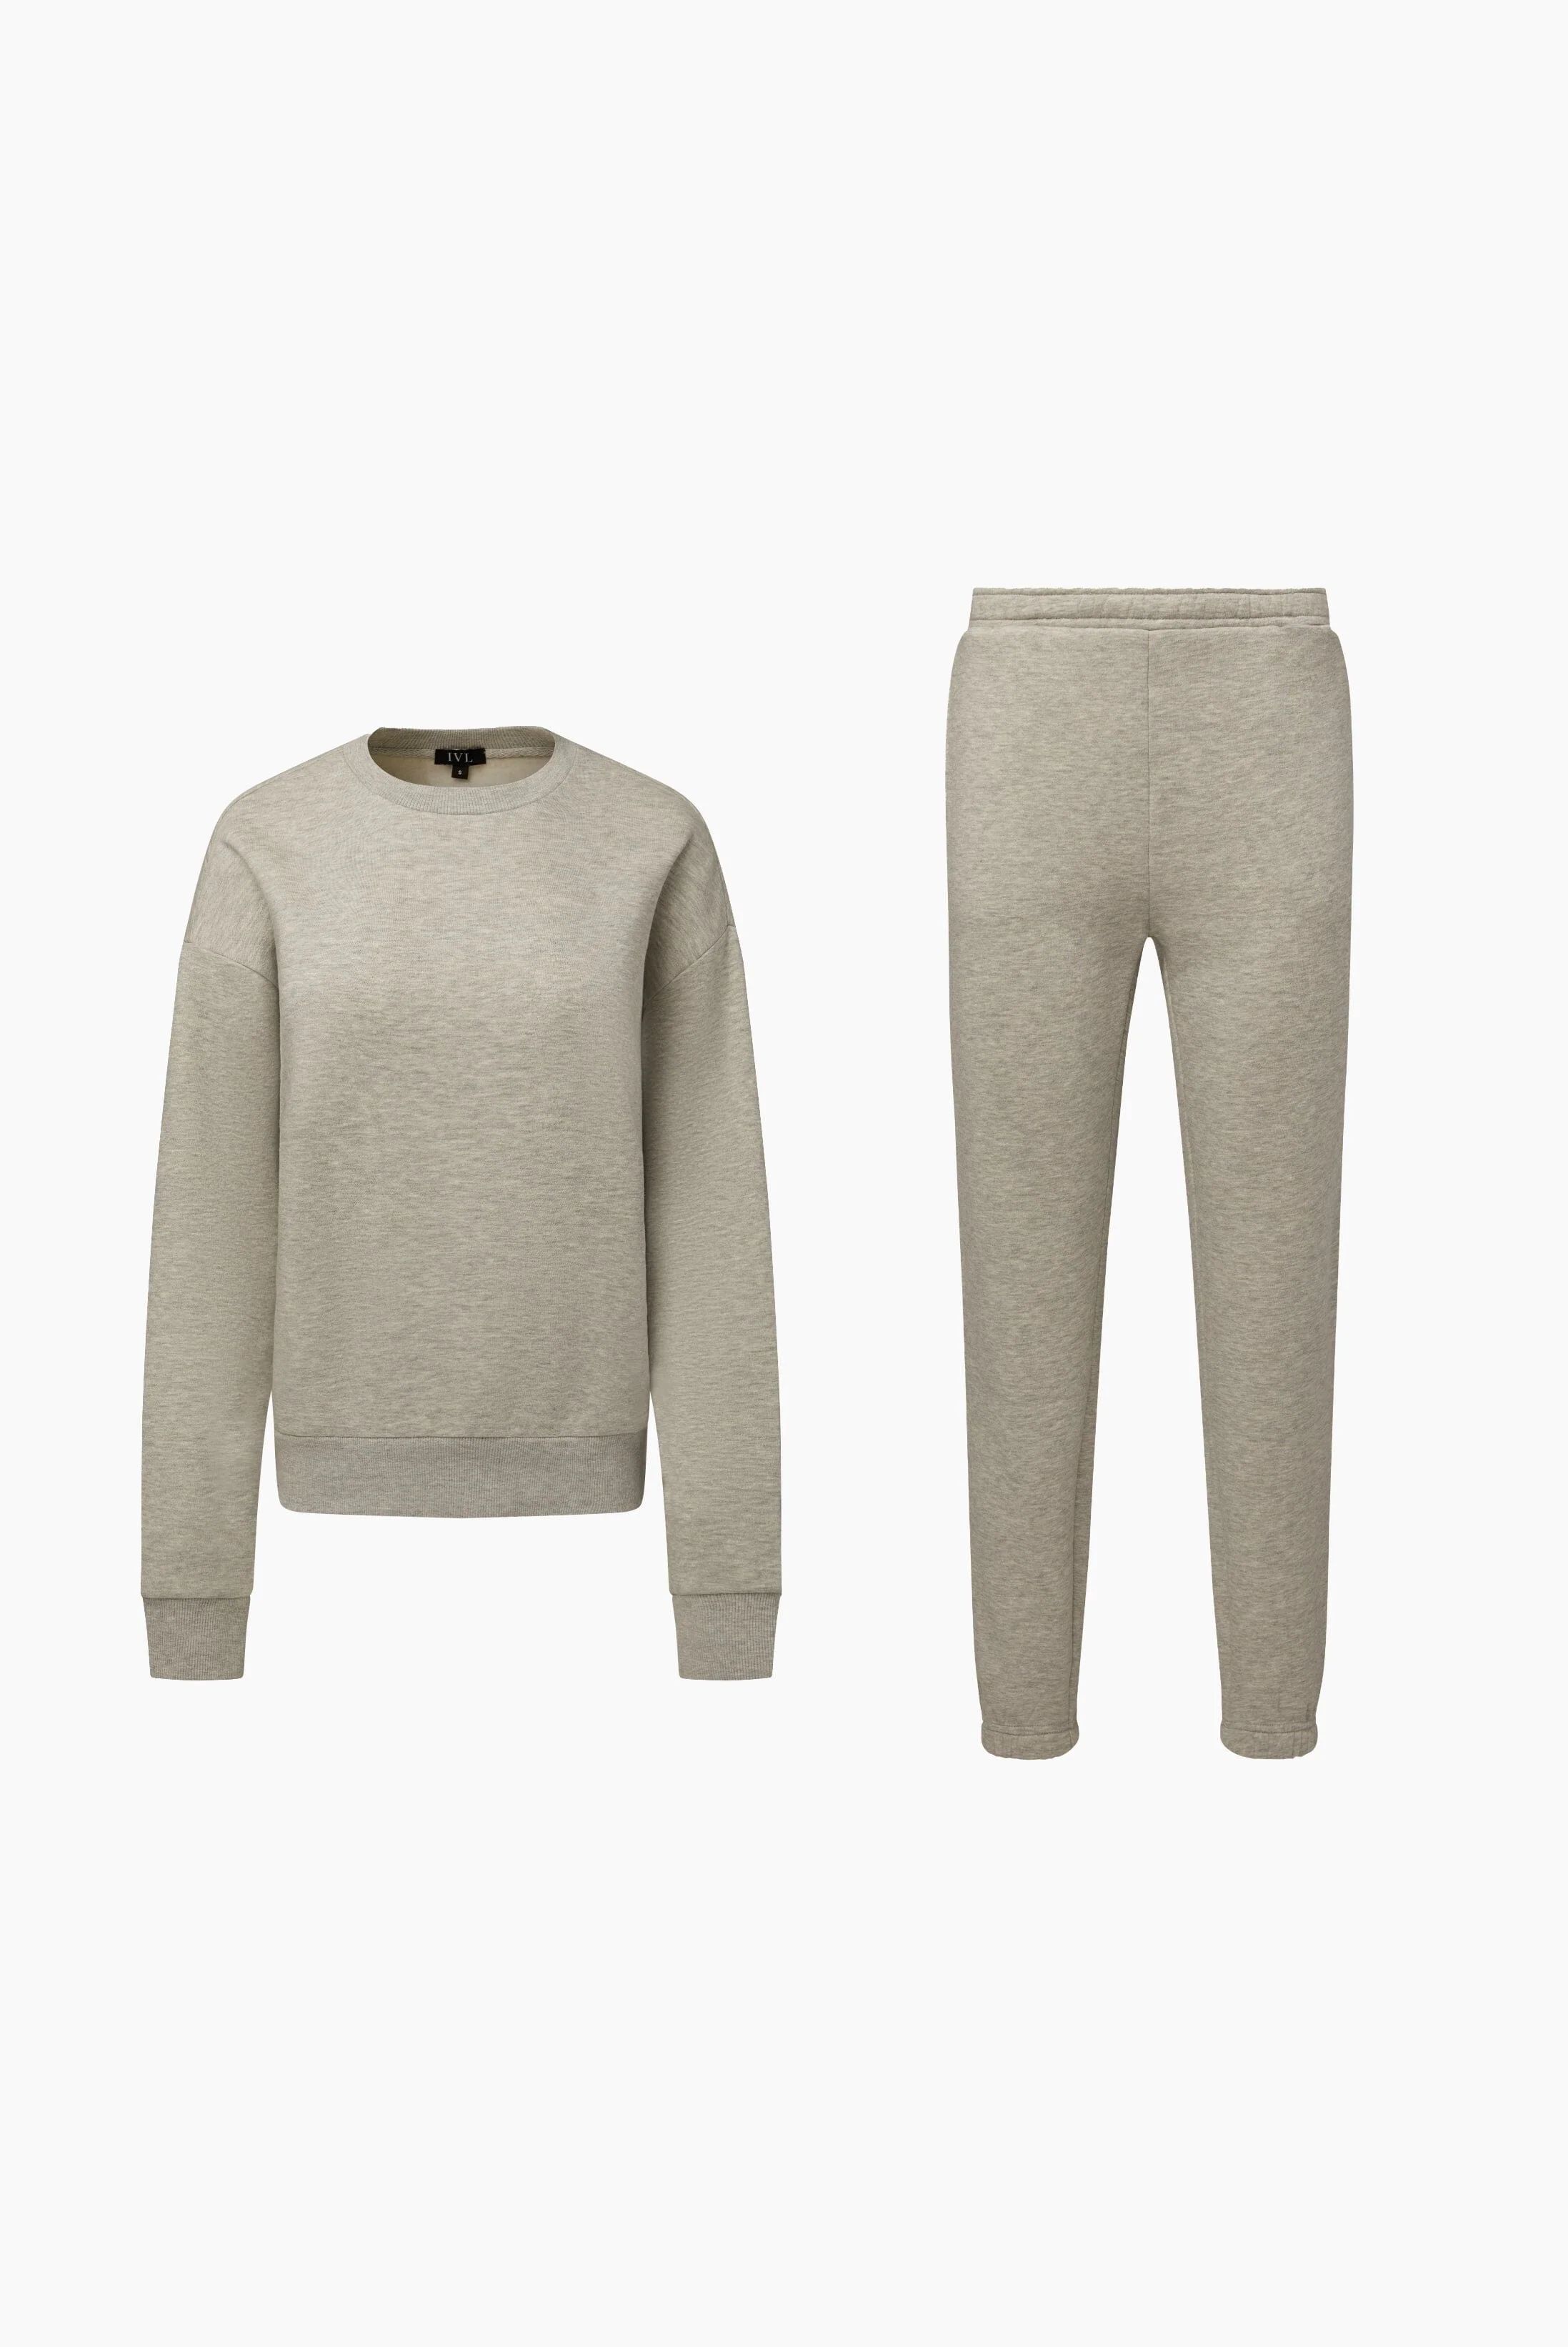 Heather Grey French Terry Crew Sweatshirt + French Terry Jogger | IVL COLLECTIVE